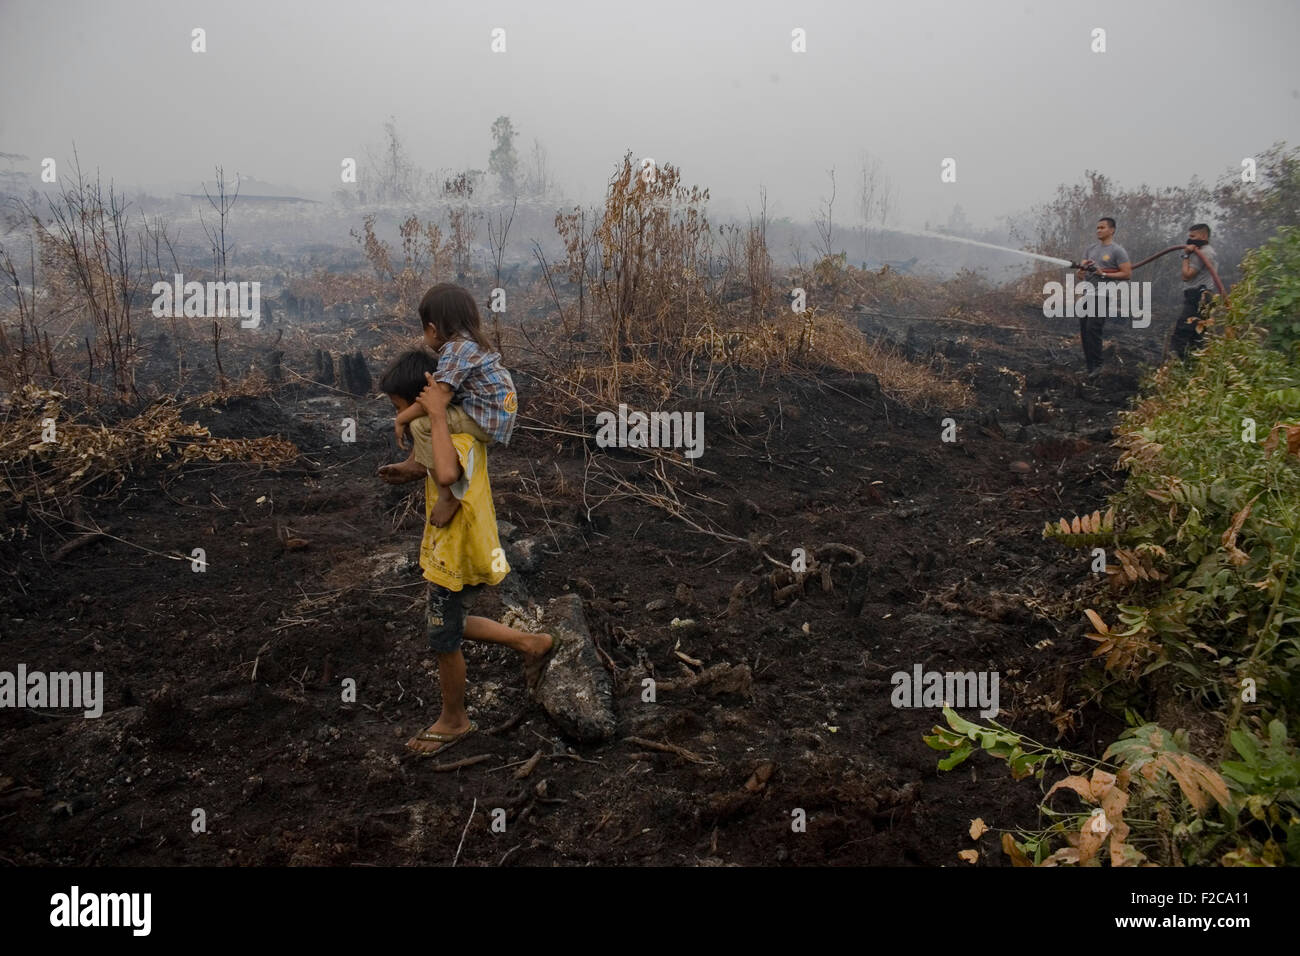 Riau, Indonesia. 16th Sep, 2015. Carrying a child with his brother to see their land were burned on the sidelines the rest of the officers extinguish a fire in Rimbo Panjang, in Riau province, Indonesia, on September 16, 2015. The government said last week that more than 25 million people in the islands of Sumatra and Kalimantan affected by haze caused by illegal land clearing, often spread choking smoke into neighboring countries. Fog emergency has been declared in six provinces and school students have been told to stay at home that threatens villages against respiratory infections. © Ivan D Stock Photo